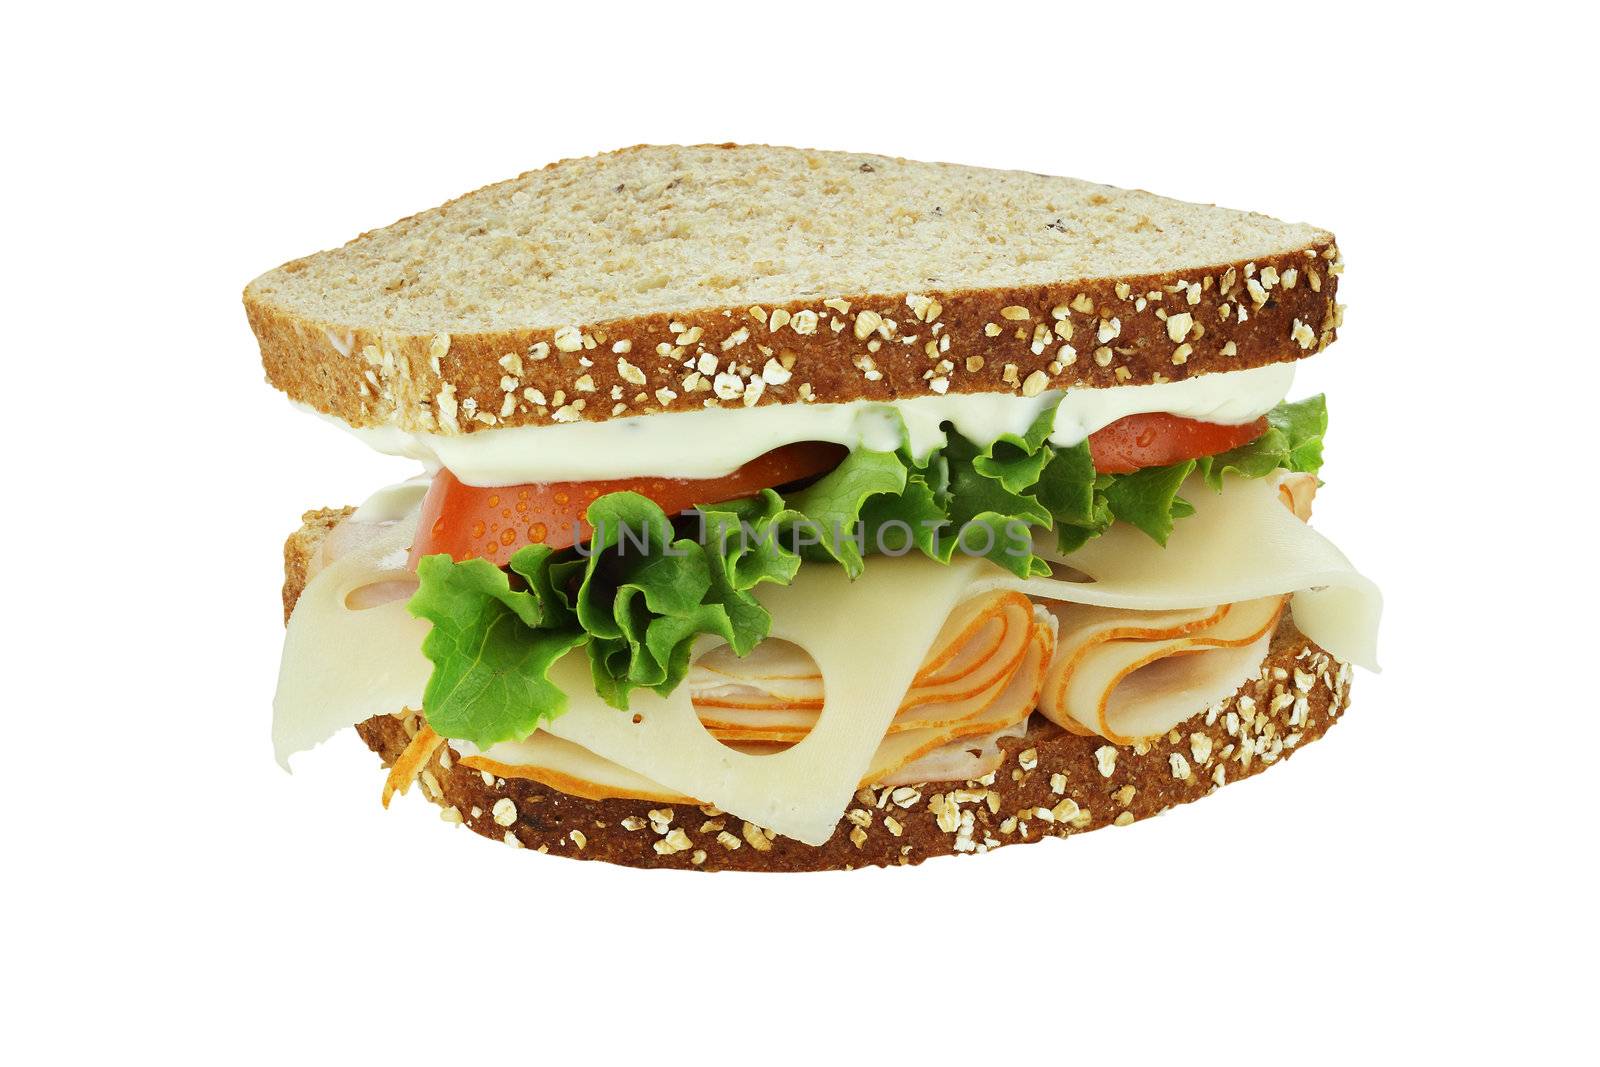 Smoked chicken sandwich with lettuce, tomato and swiss cheese on whole grain bread isolated on a white background. Clipping path included.

